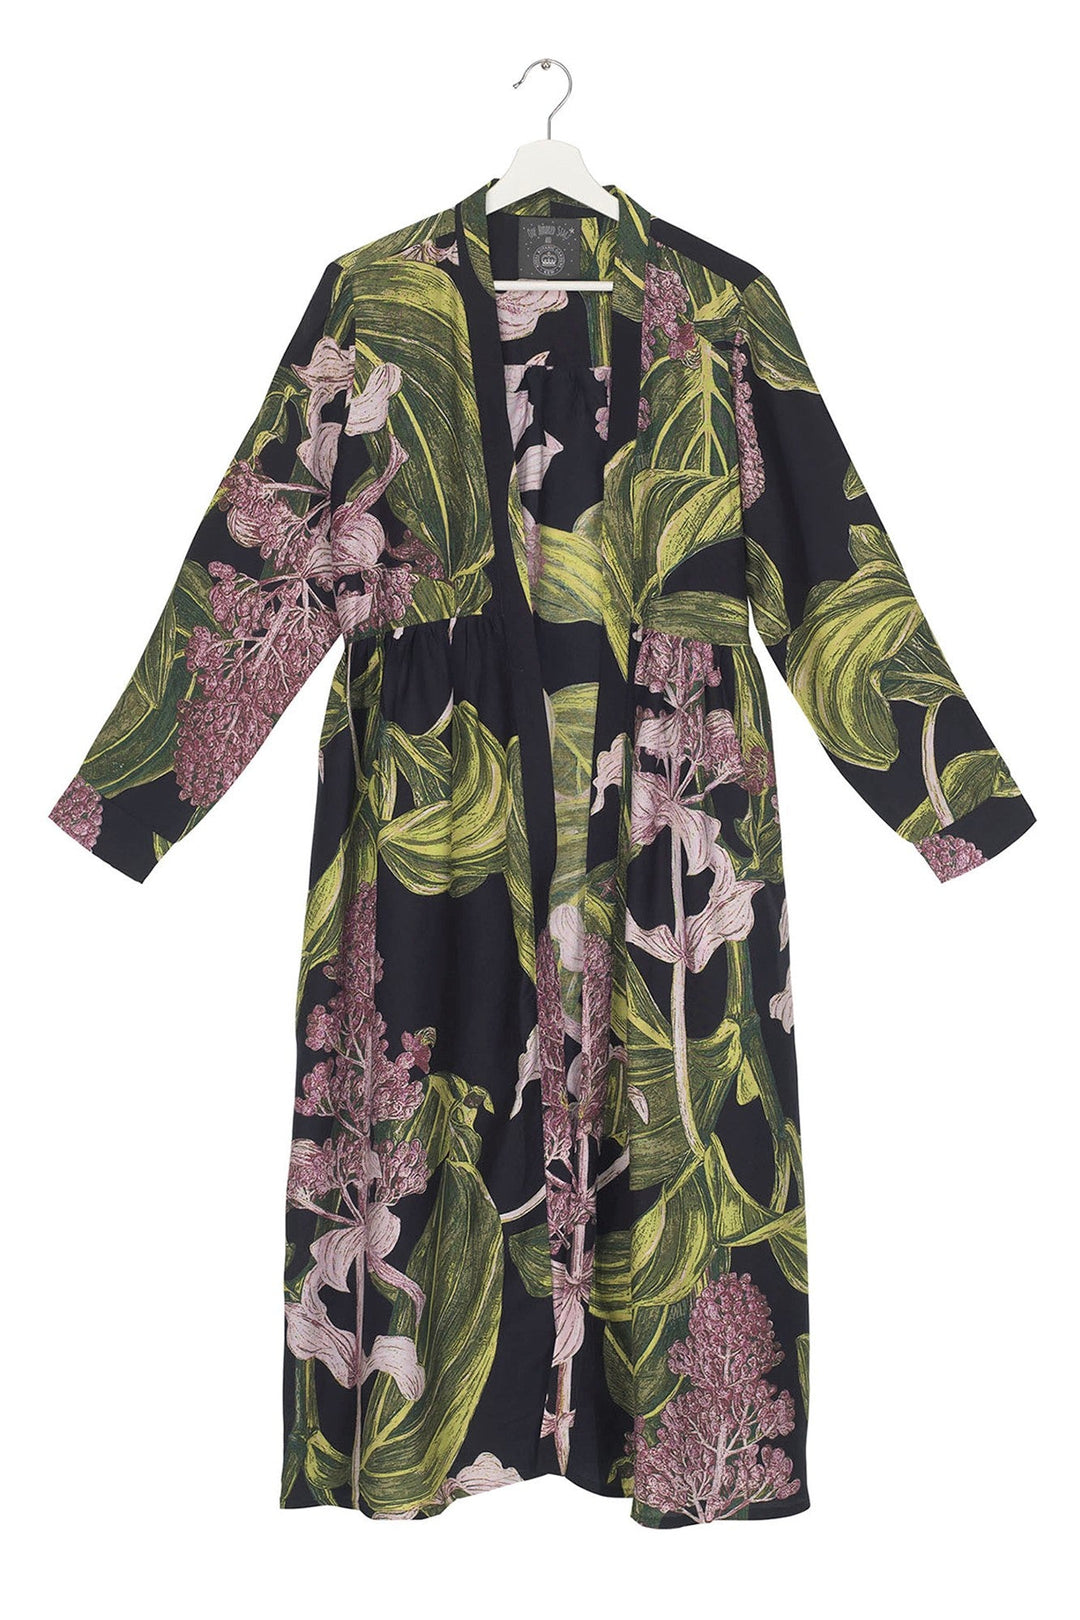 Marianne North Medinilla Duster Coat- This stunning shape is both stylish and versatile, whether you choose to wear our duster coat as a luxurious house coat, as part of a chic ensemble during the day or over a little black dress during the evening.